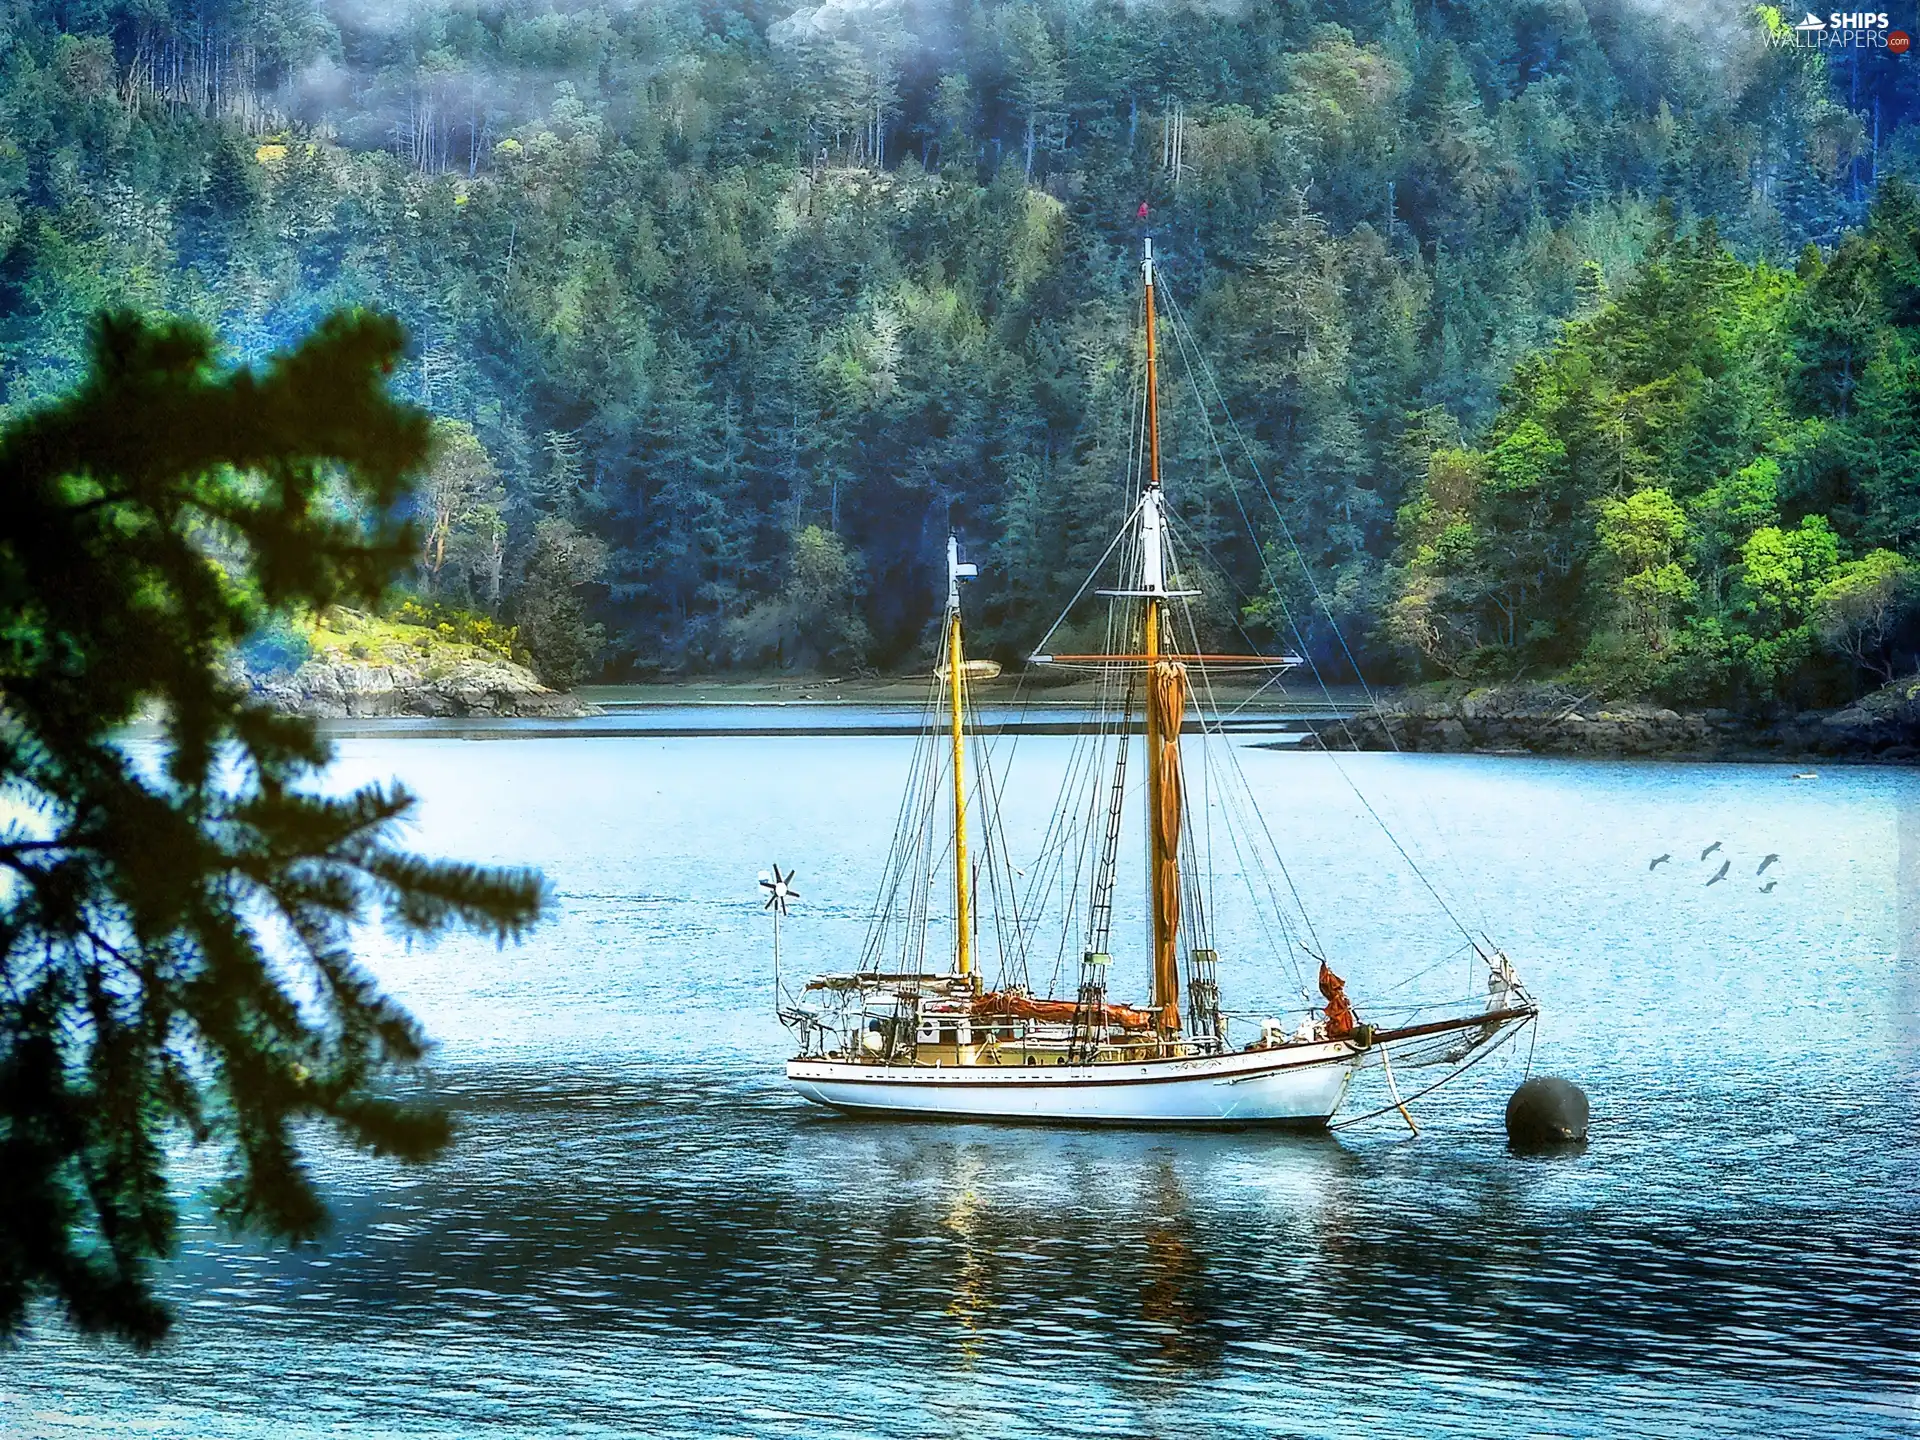 Gulf, trees, viewes, sailing vessel